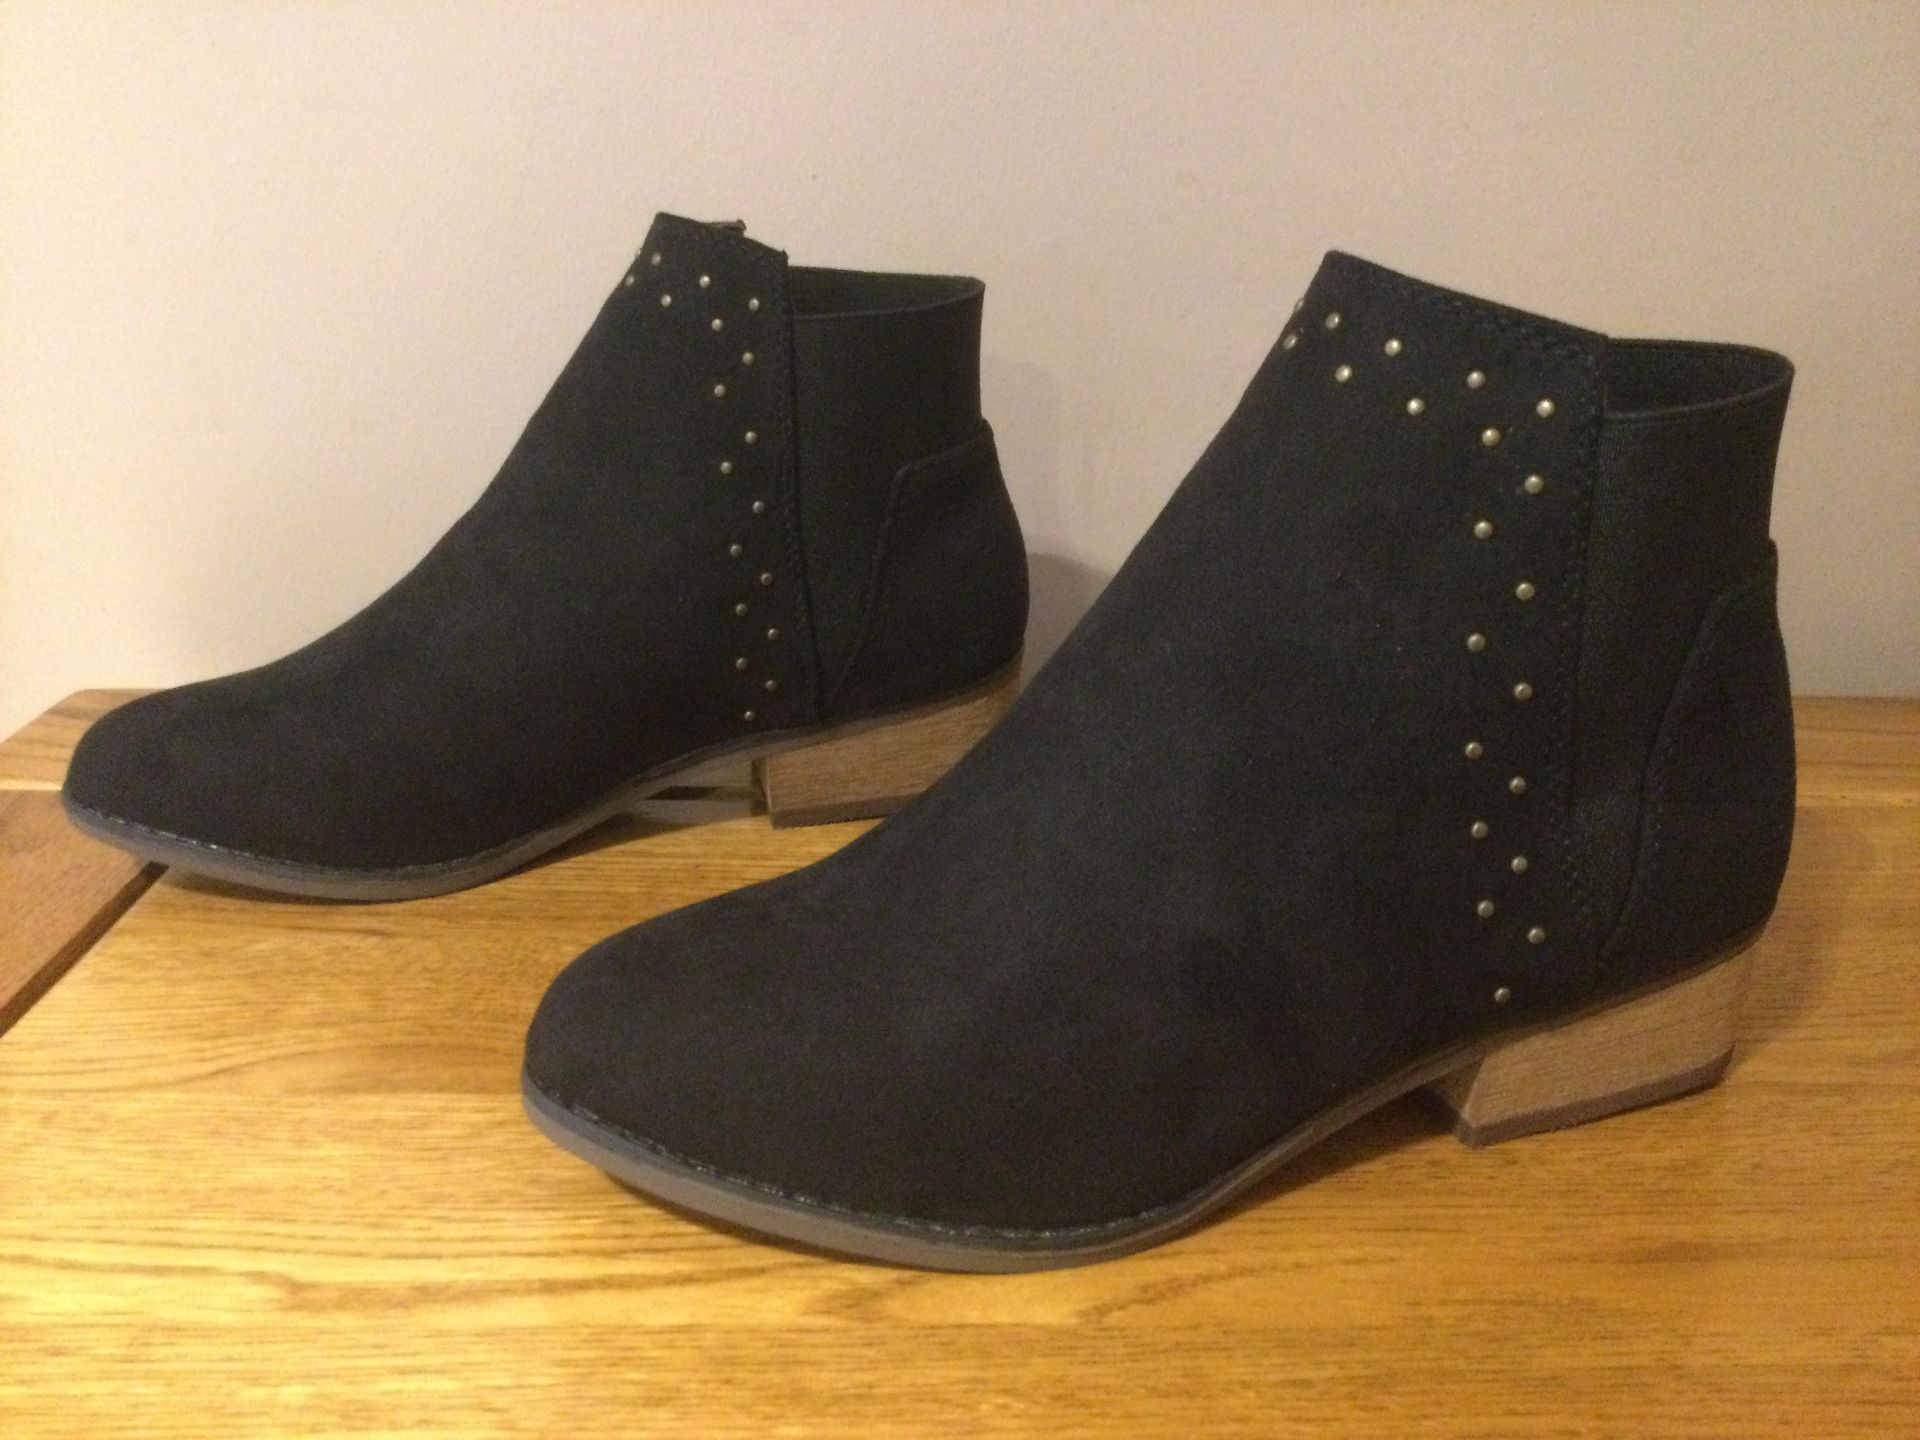 Dolcis “Wendy” Low Heel Ankle Boots, Size 5, Black - New RRP £45.99 - Image 2 of 7